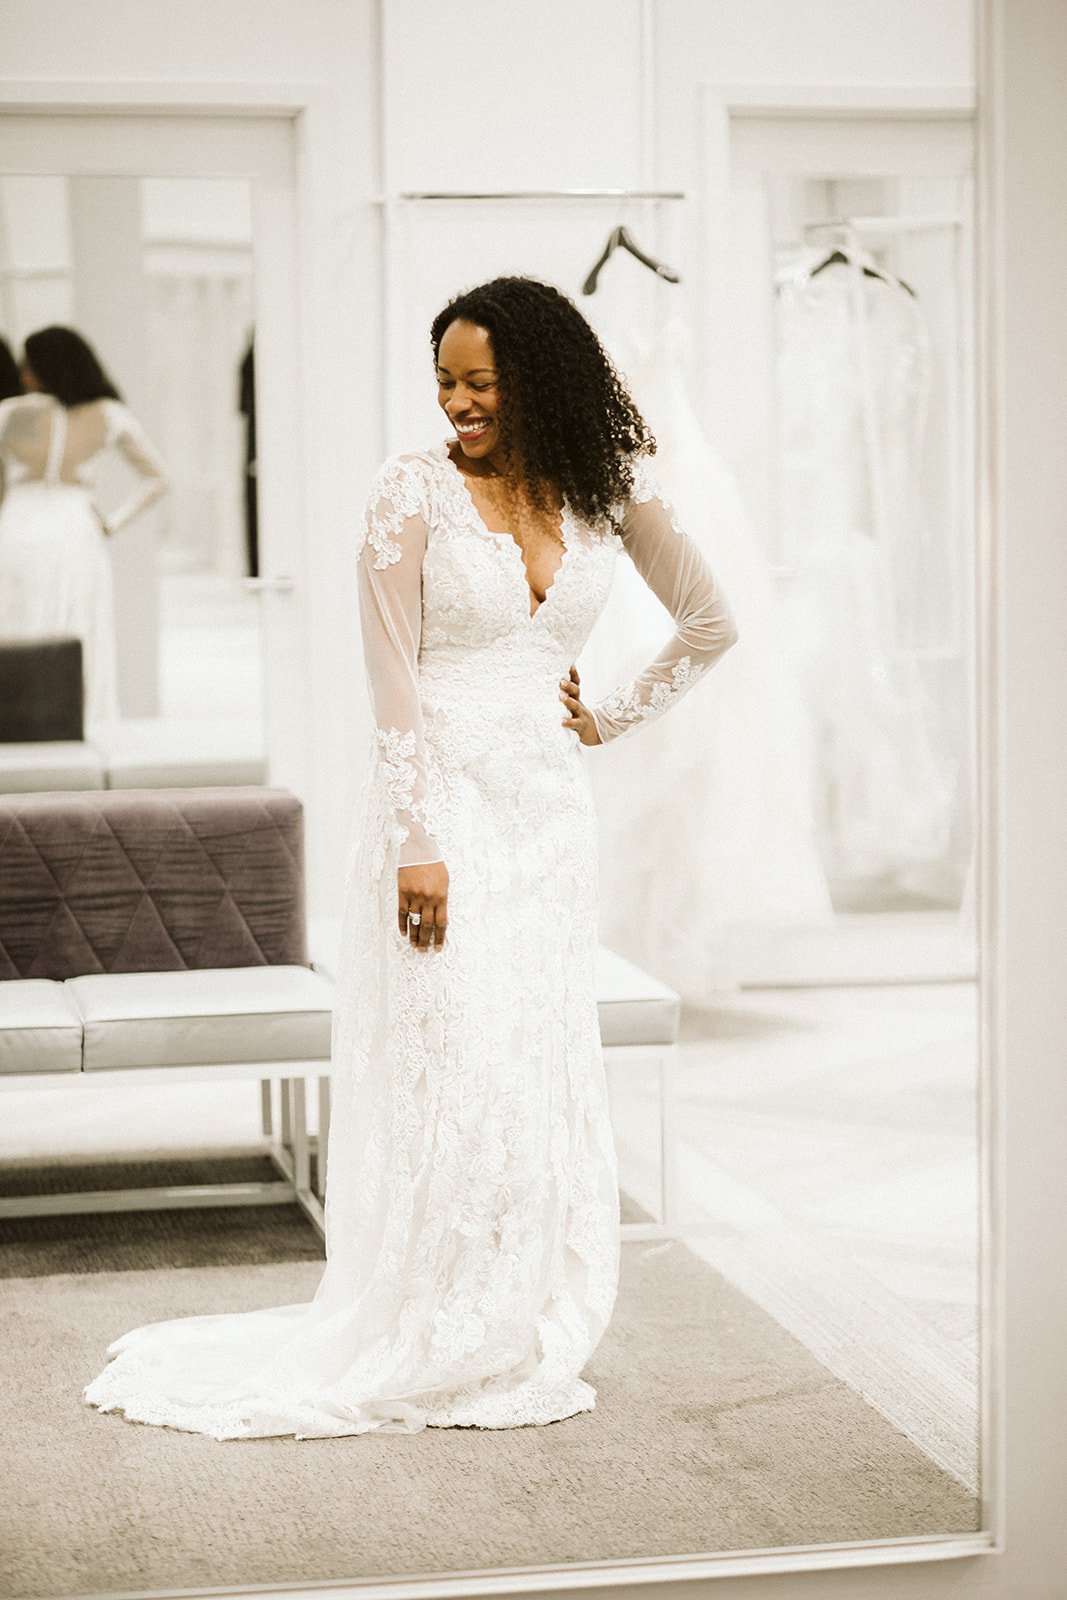 A woman with coiled dark hair smiles with her hand on her hip as she stands in front of a mirror wearing a long sleeve deep-v neck wedding gown in the modern fitting room at David's Bridal